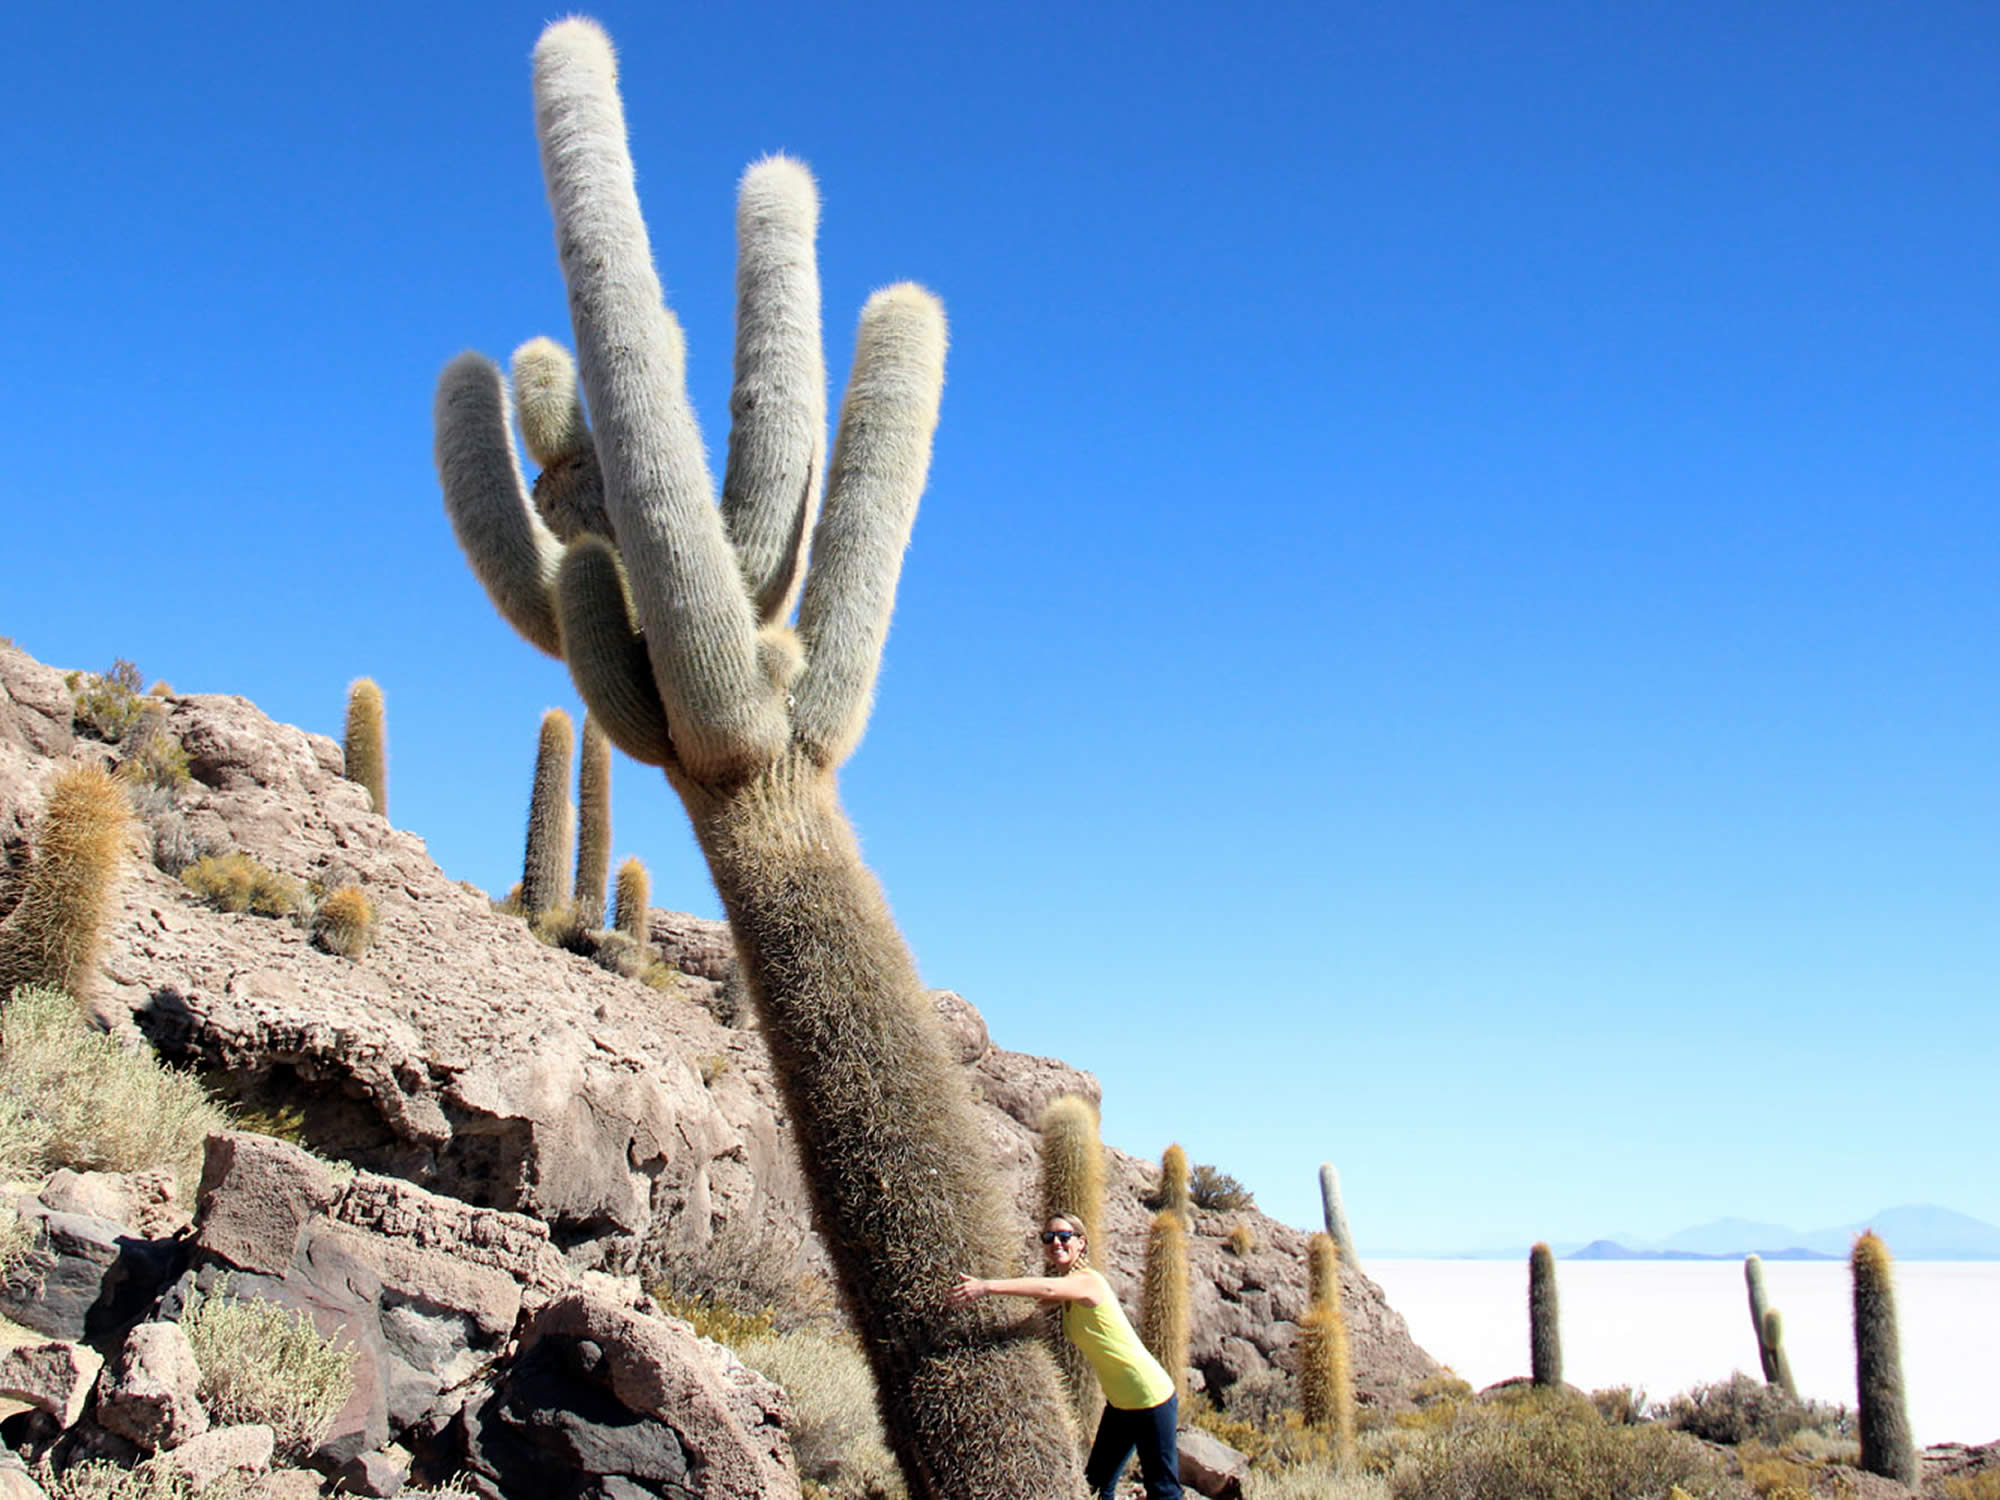 Thousand year old cactus